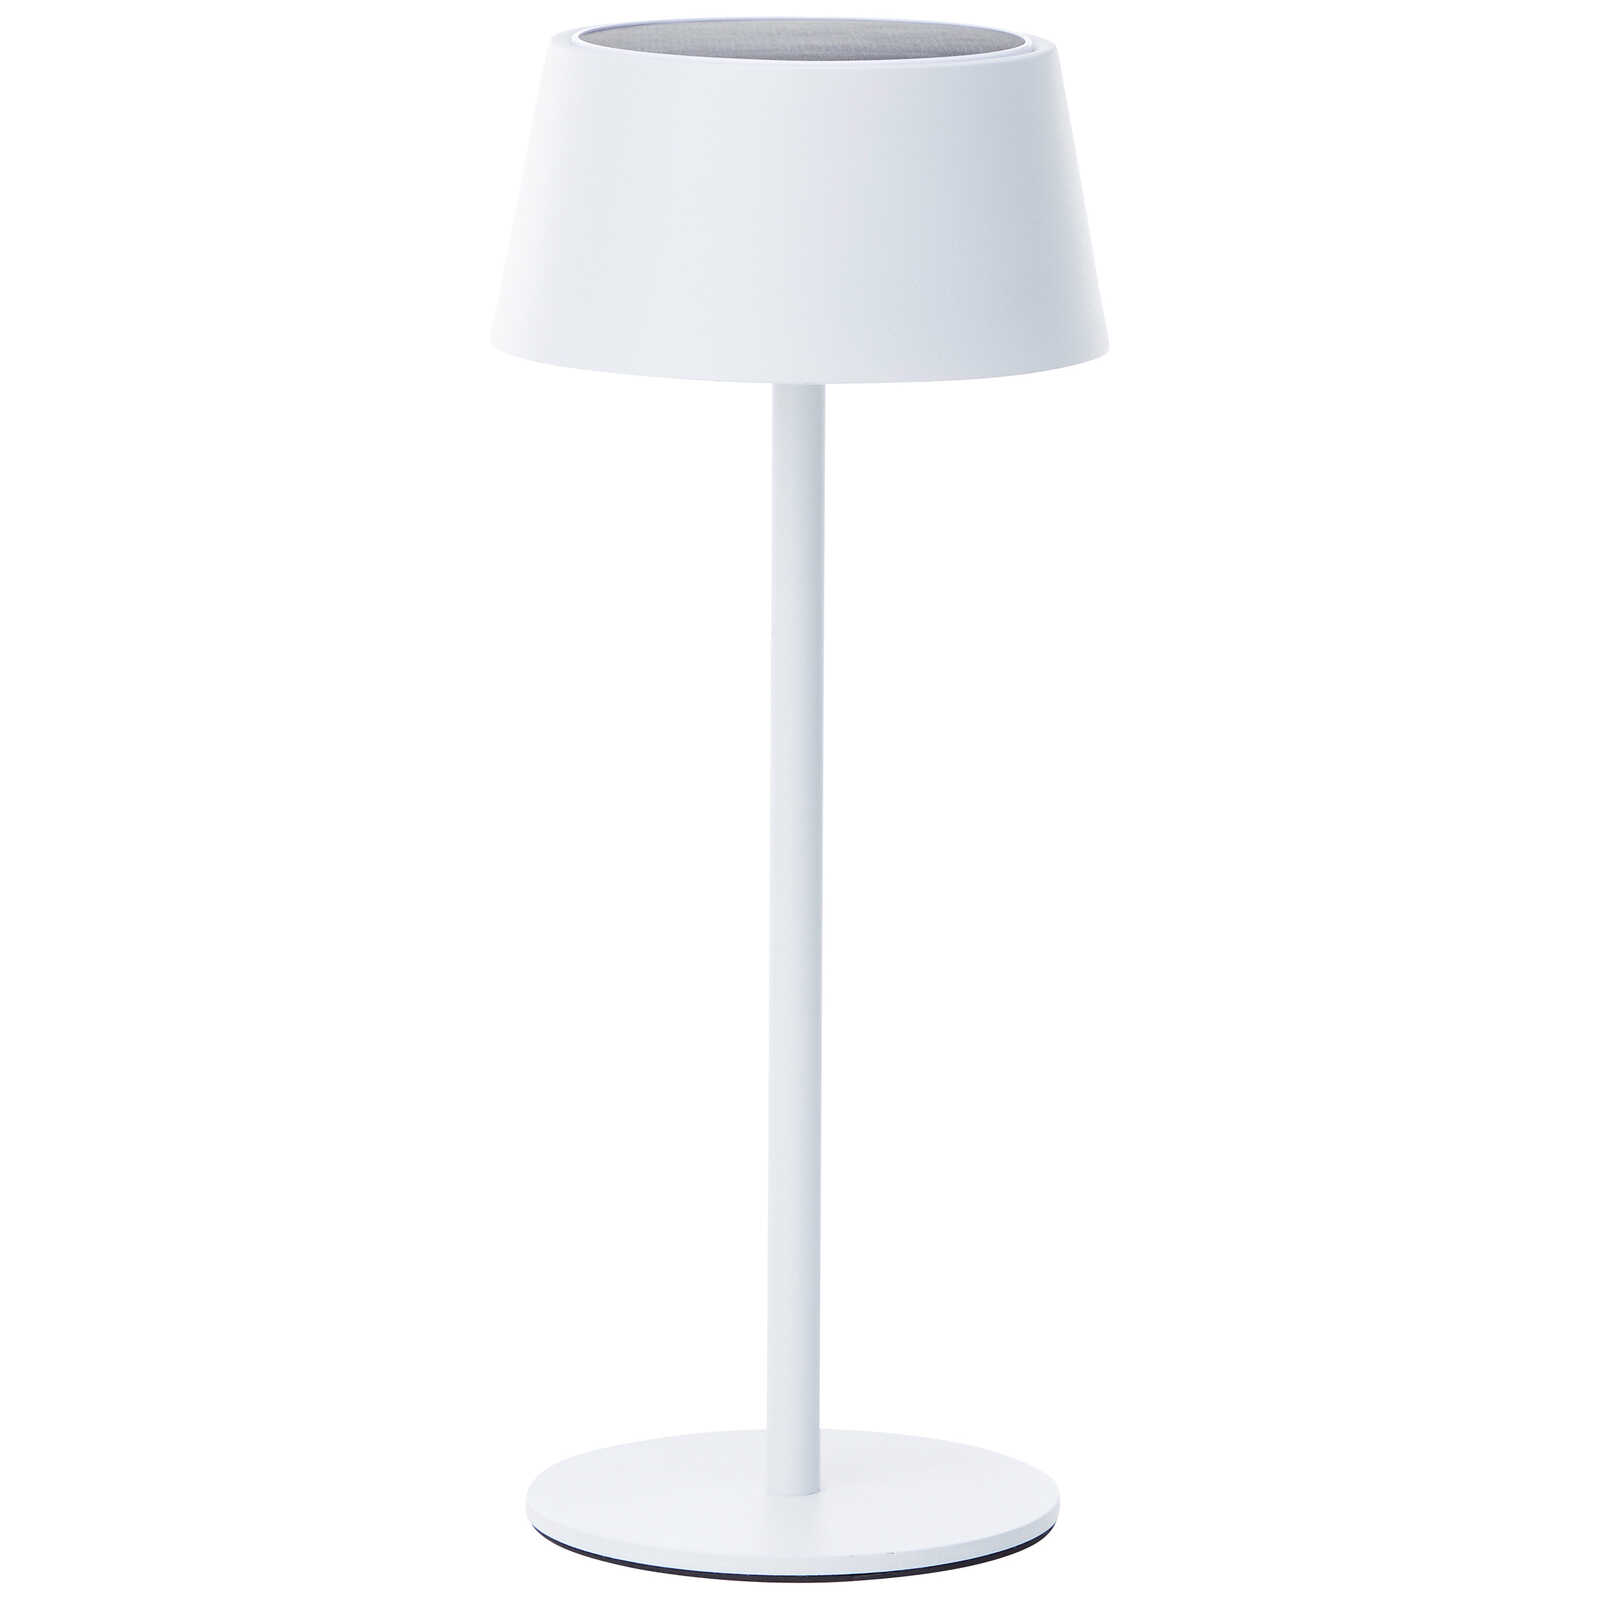             Metal table lamp - Outy 1 - White
        